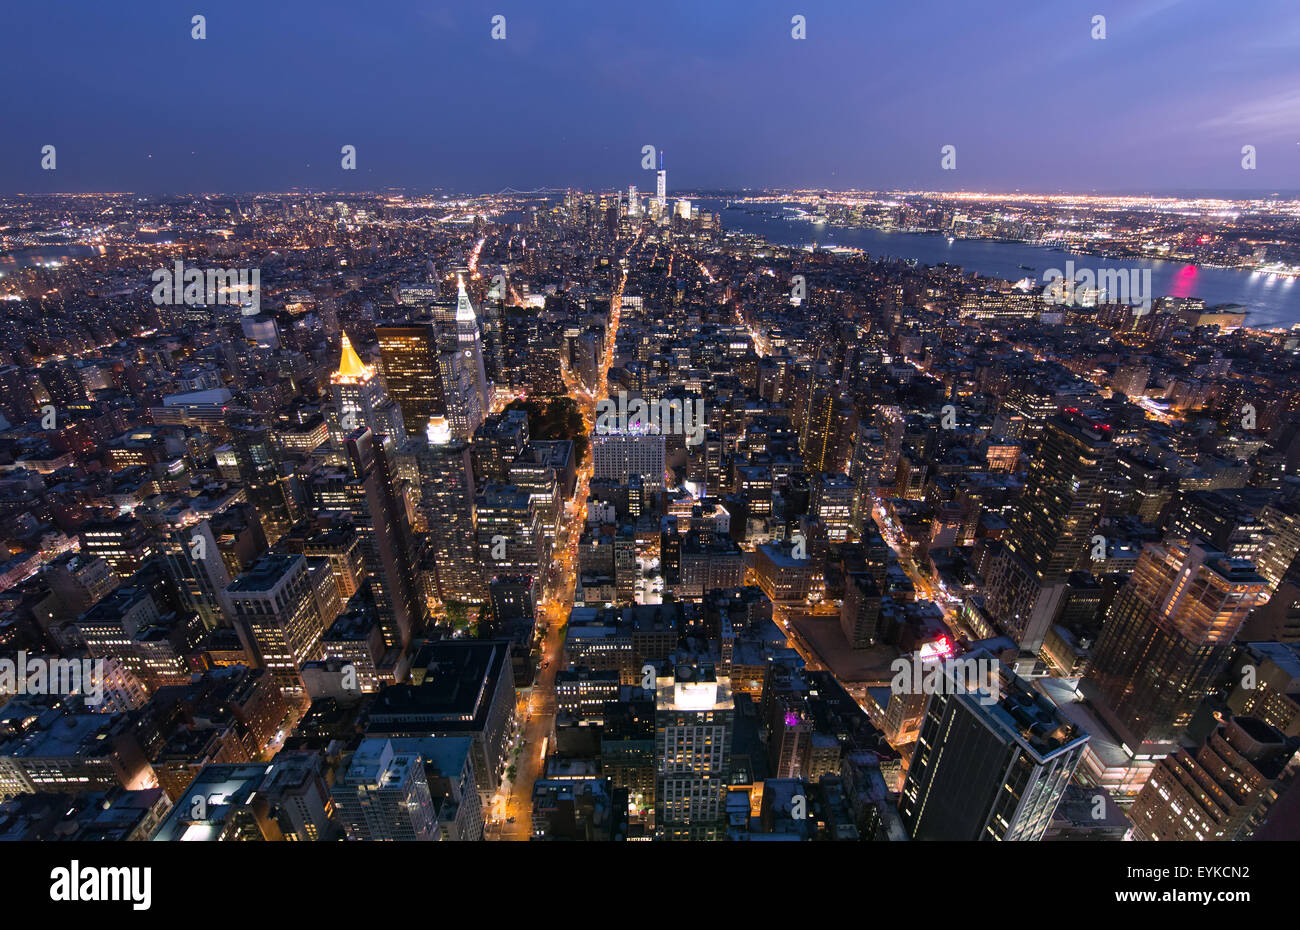 Manhattan from high above midtown, looking towards downtown. (Taken from Empire State Building) Stock Photo